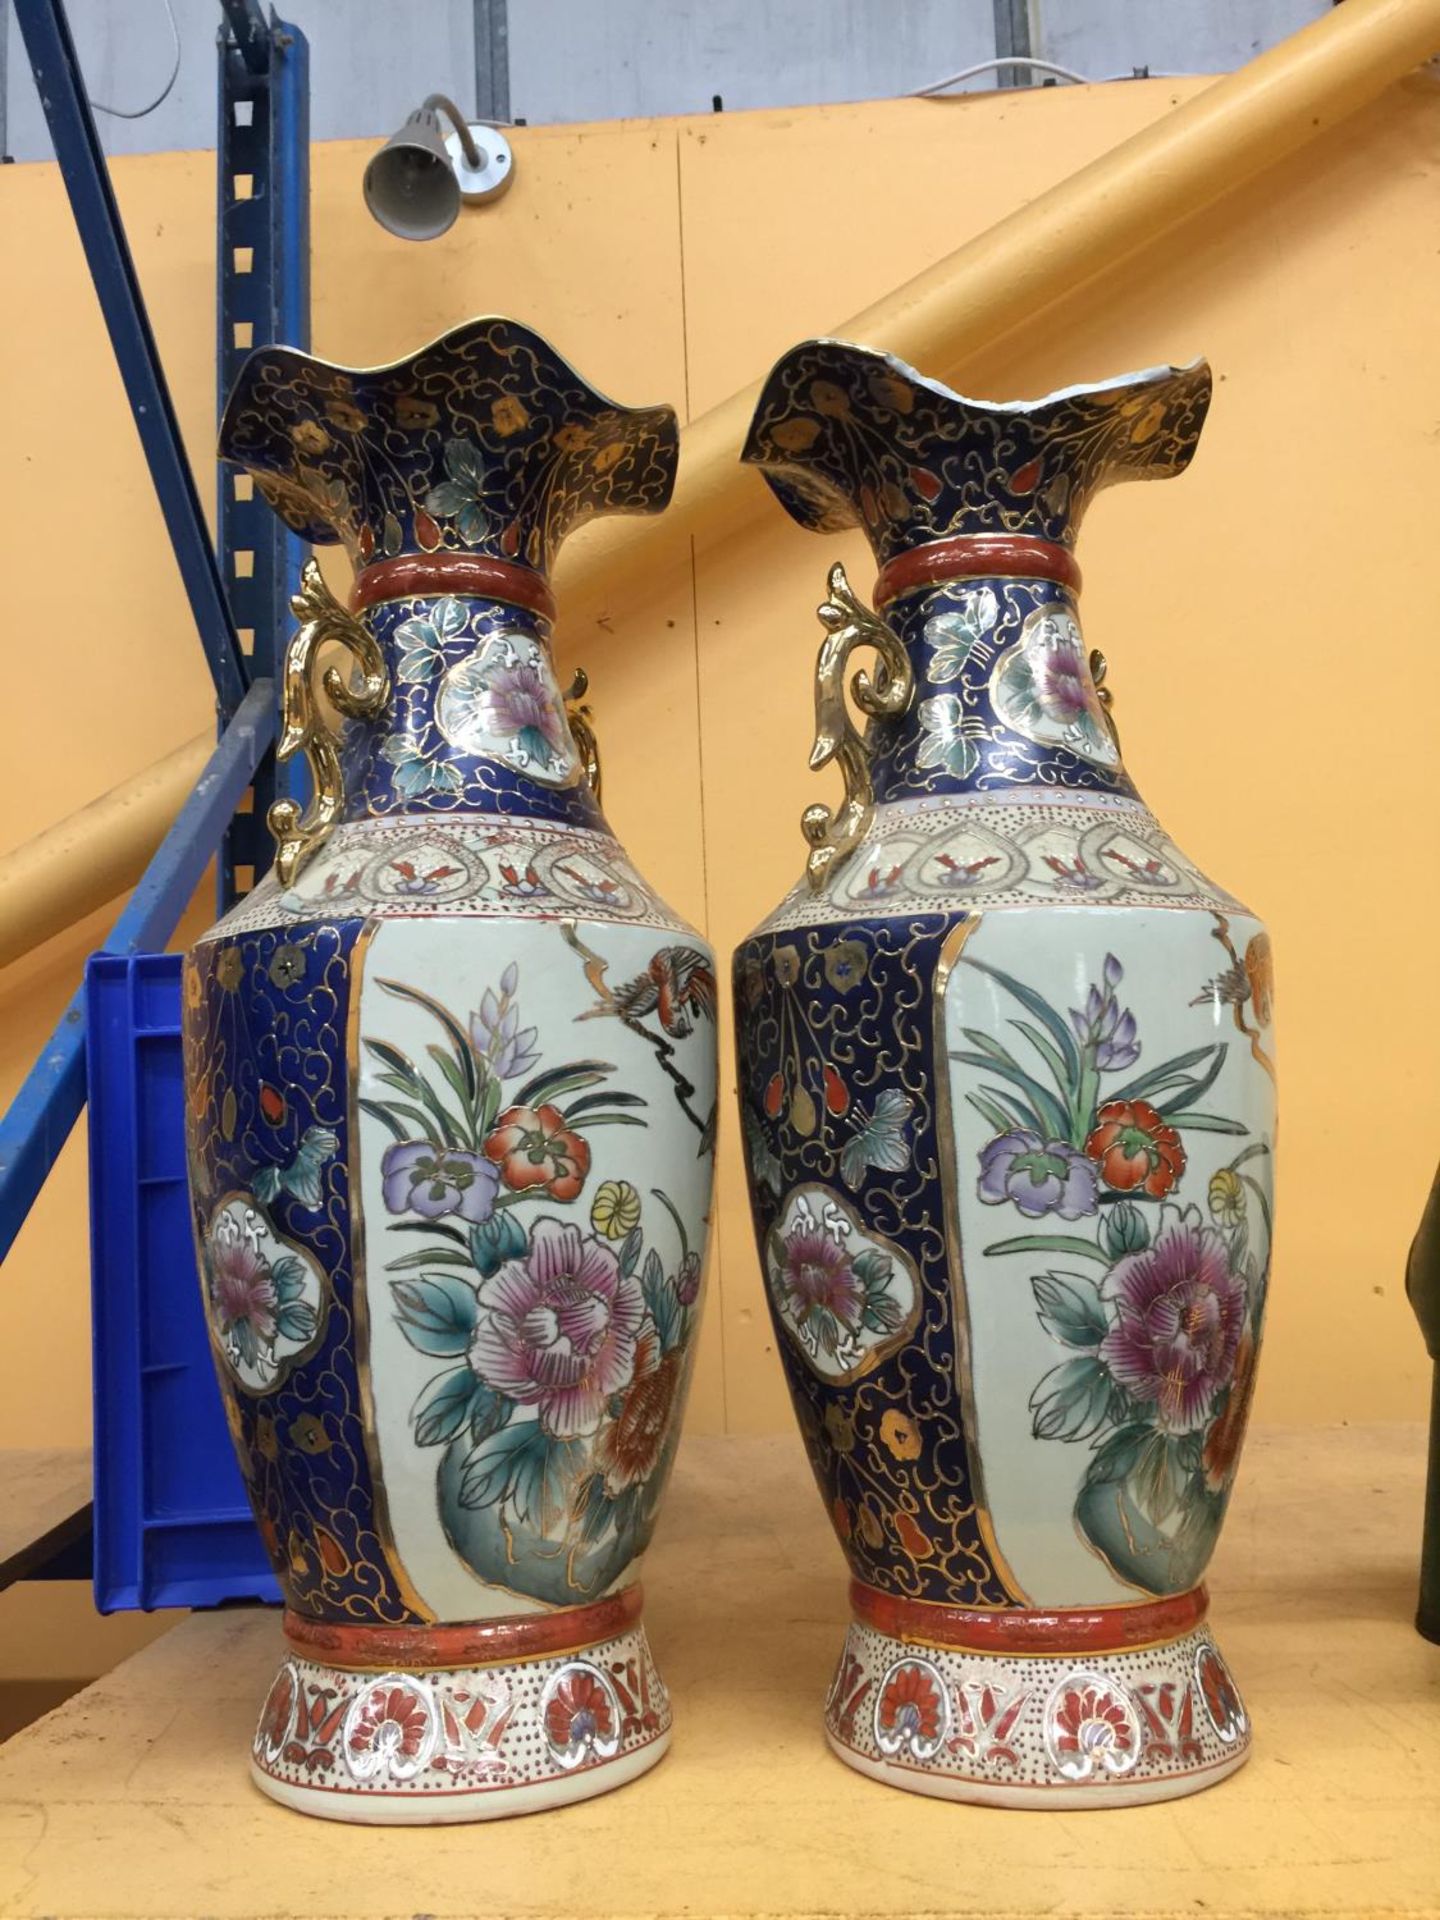 TWO LARGE ORIENTAL VASES WITH CLOISONNE DECORATION OF CHRYSANTHEMUMS, BIRDS, ETC HEIGHT 61CM - ONE - Image 2 of 3